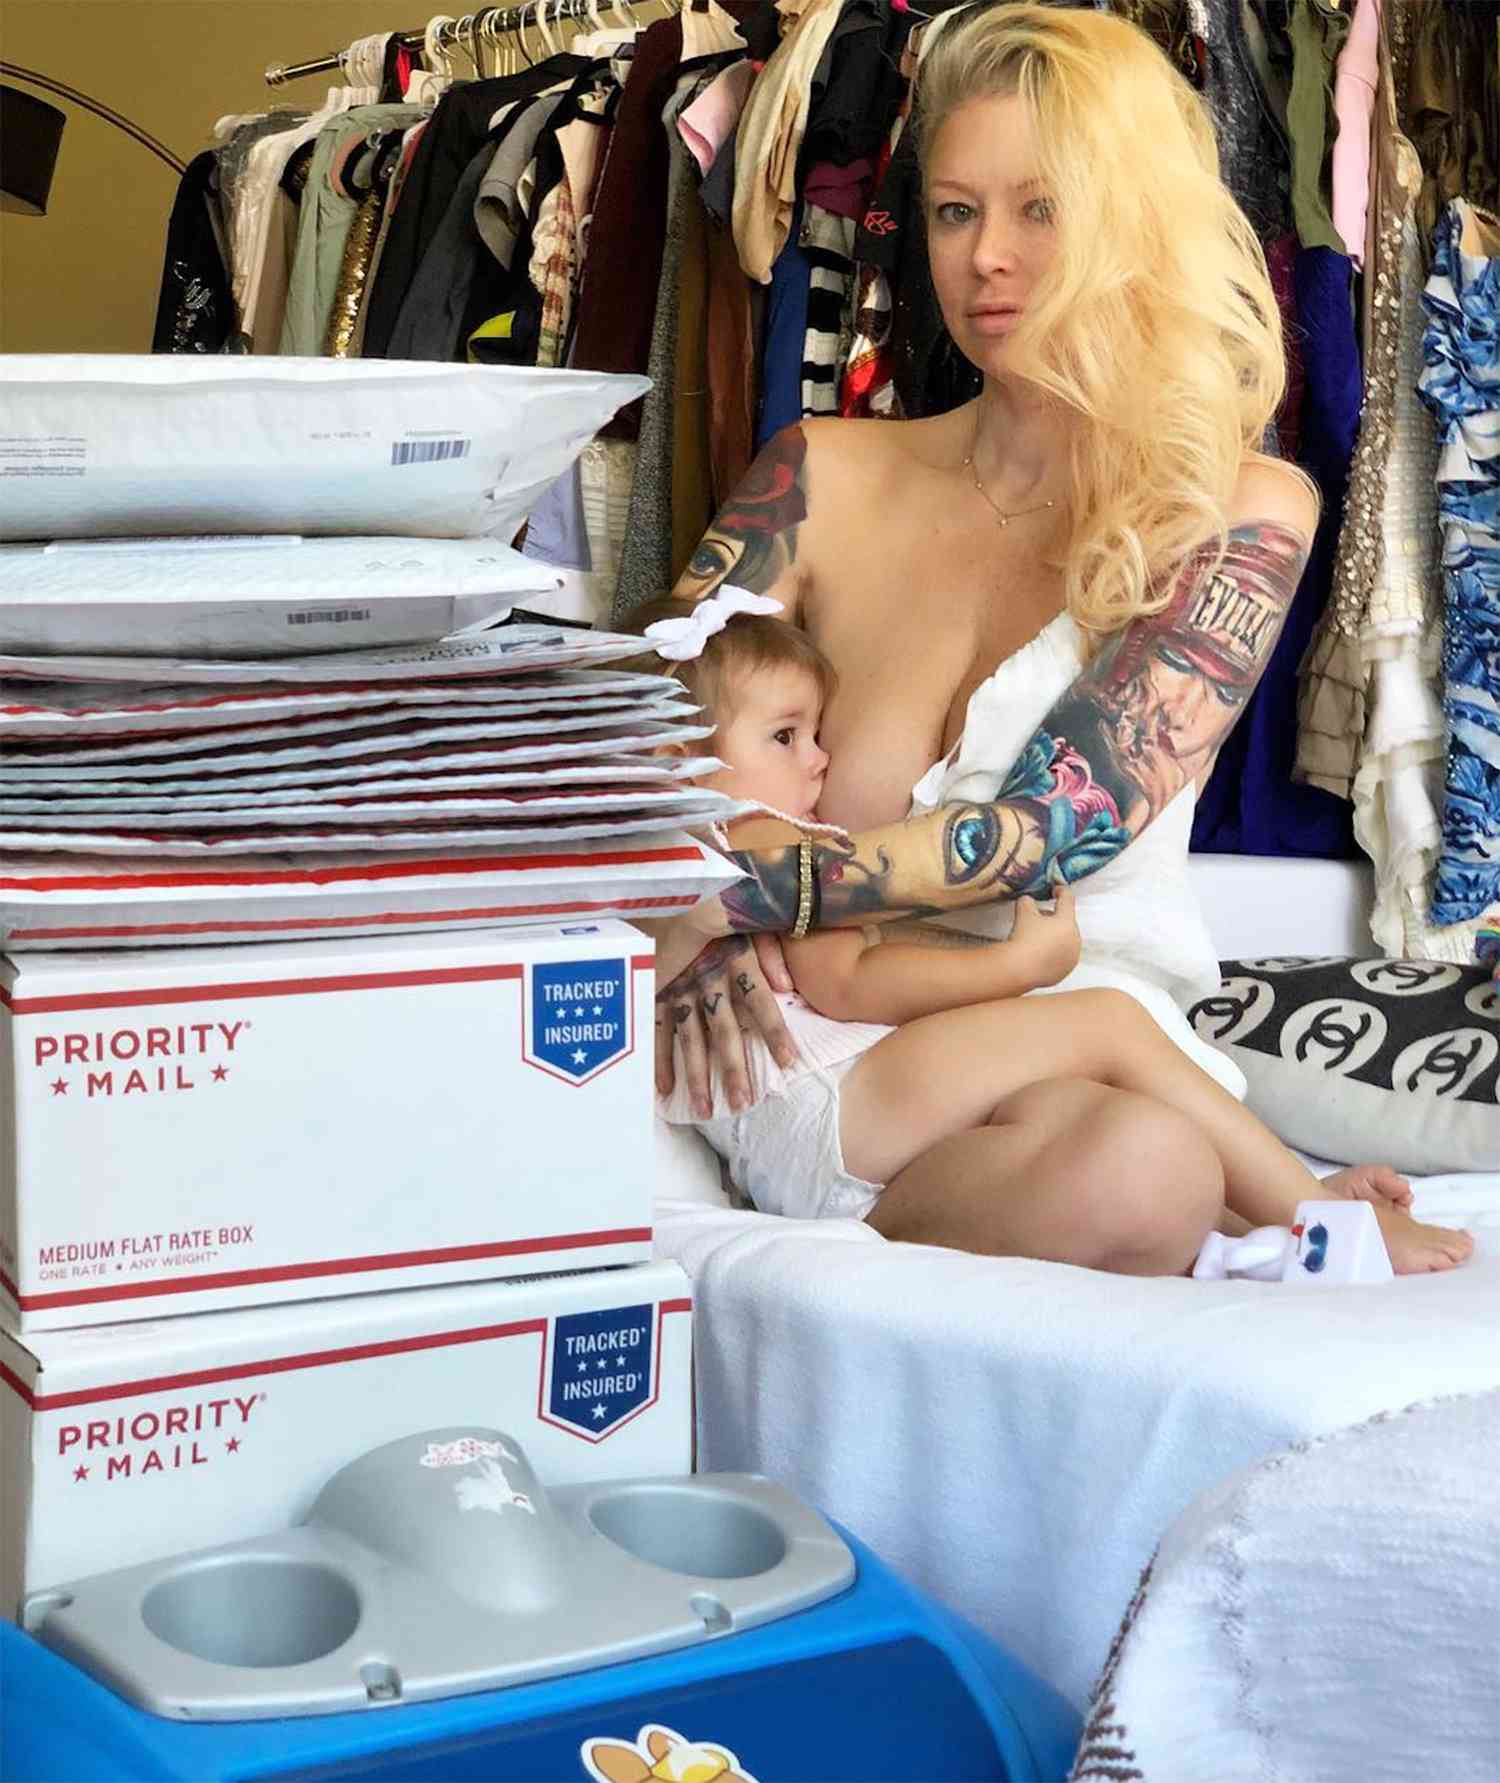 amr fatouh recommends jenna jameson home video pic